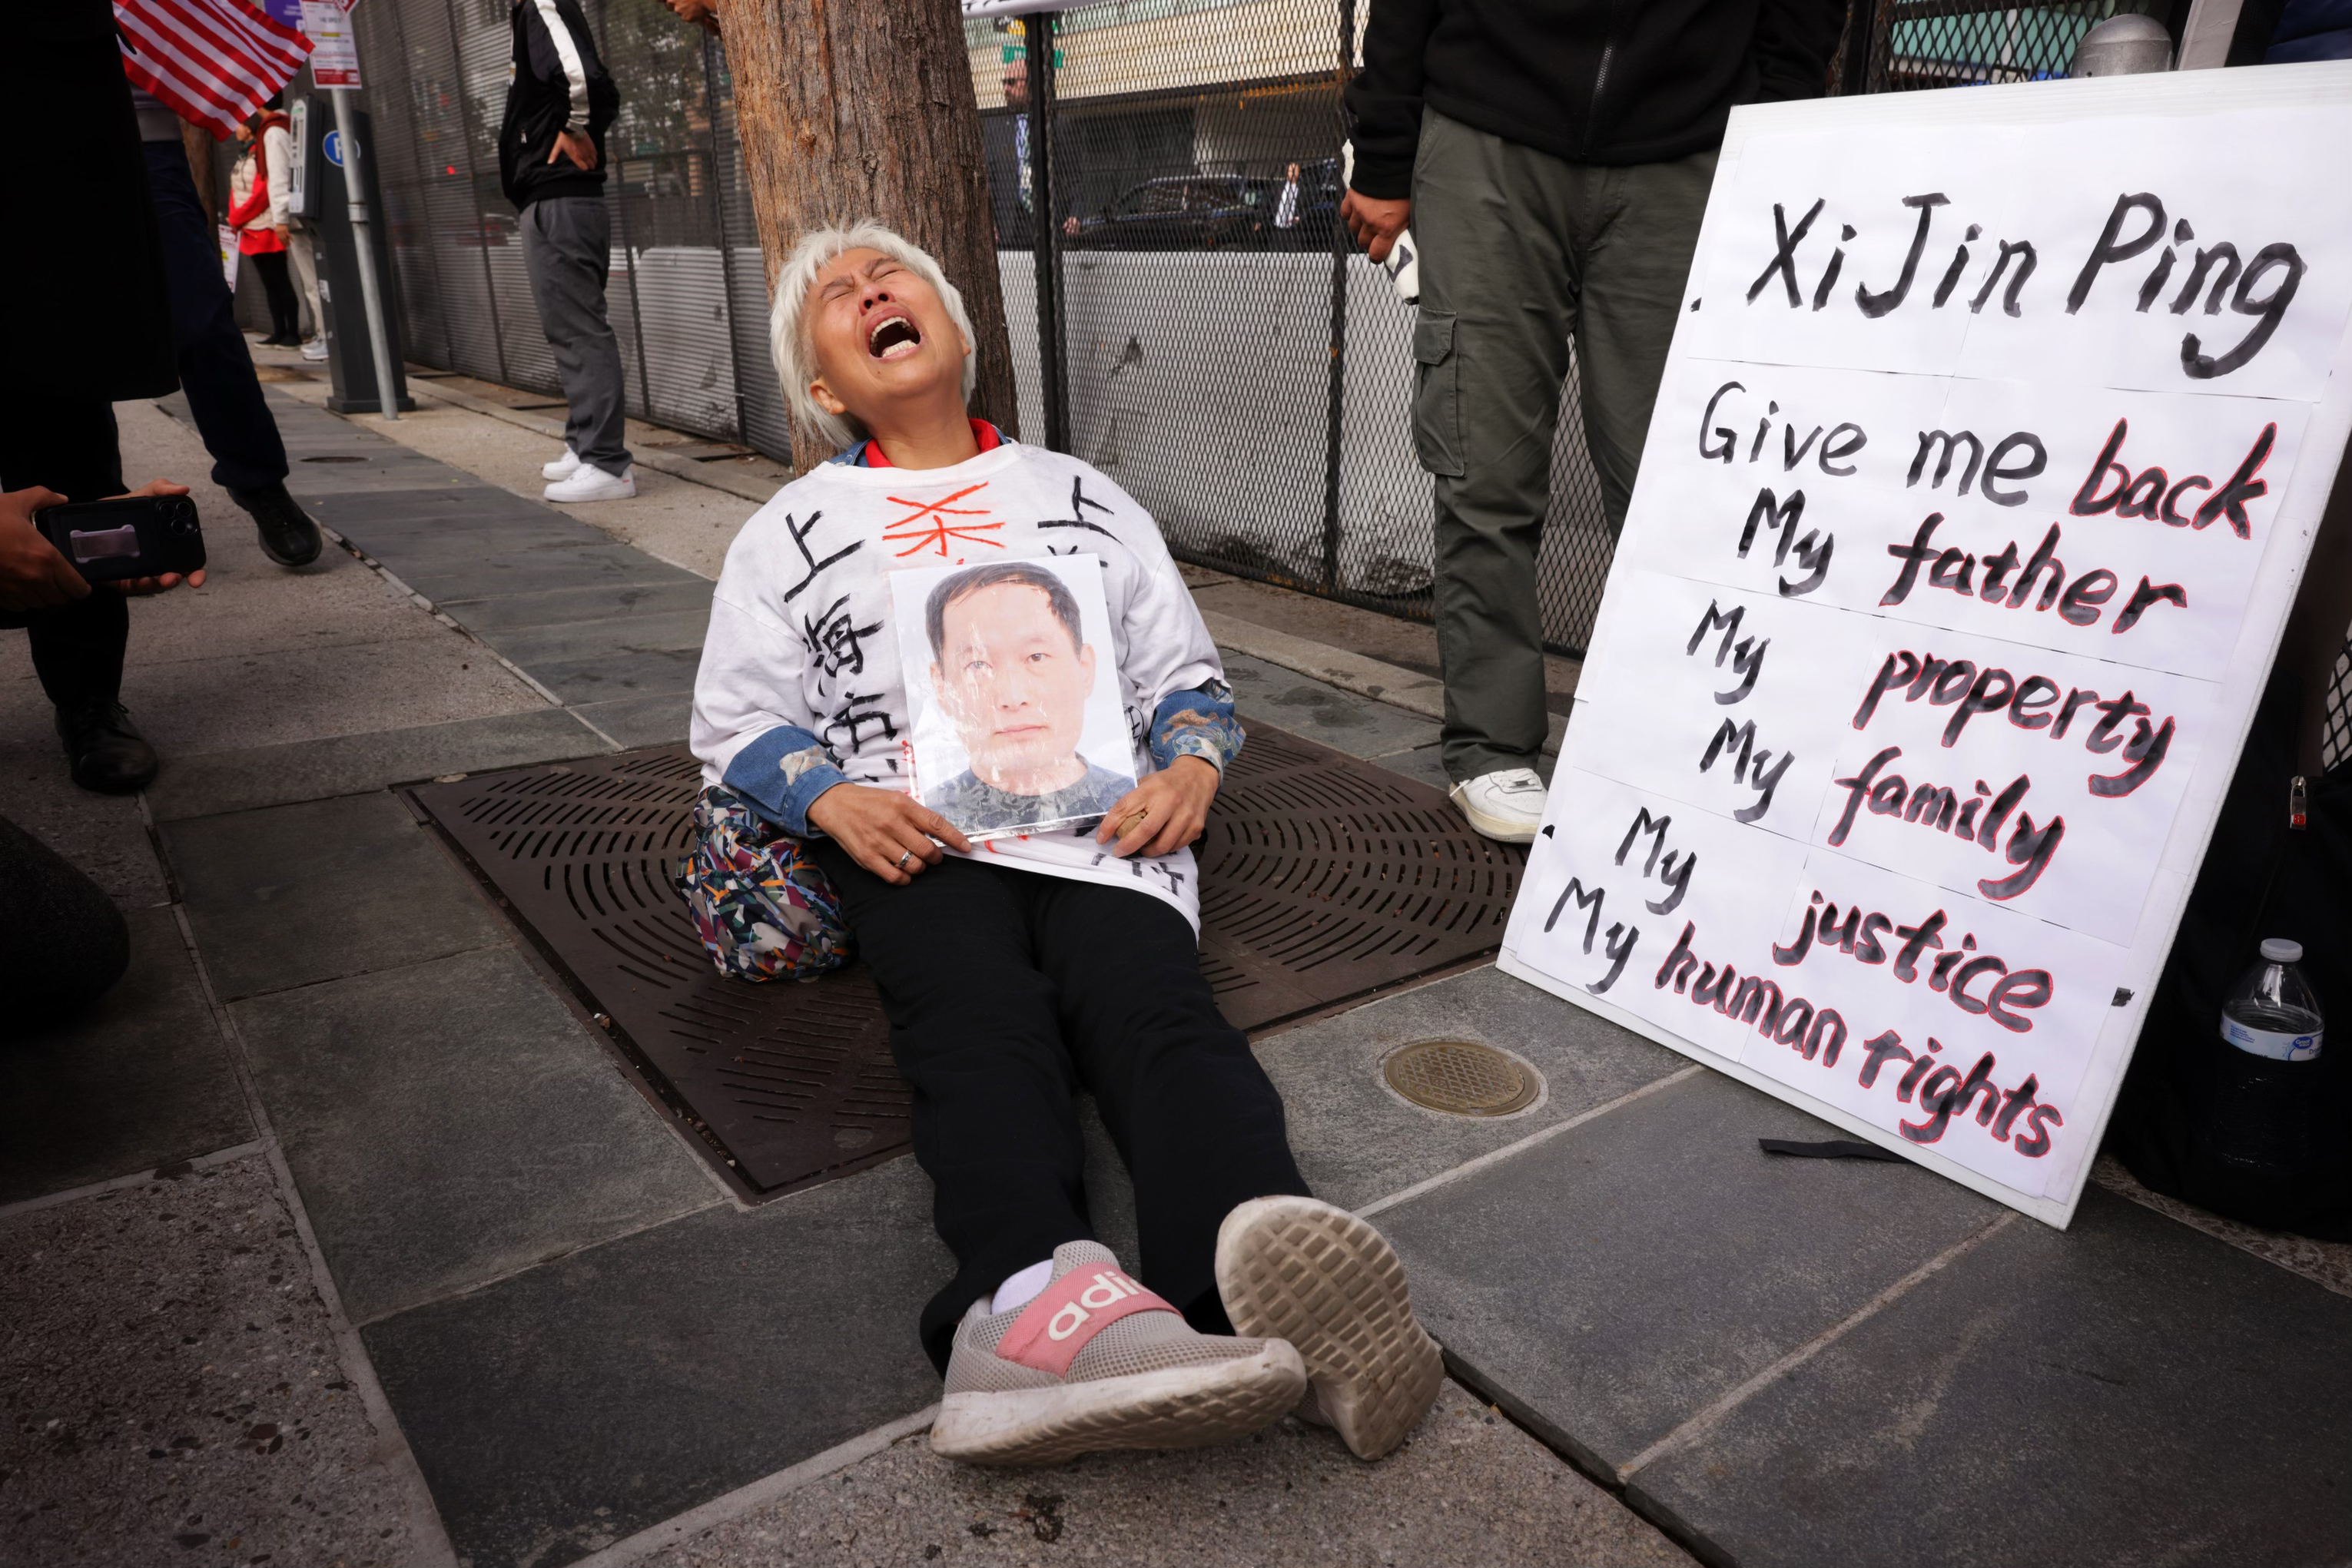 A woman screams while sitting on the ground with a large sign next to her that reads "Xi Jin Ping, Give me back My father. My property, My family, My justive, My human rights"